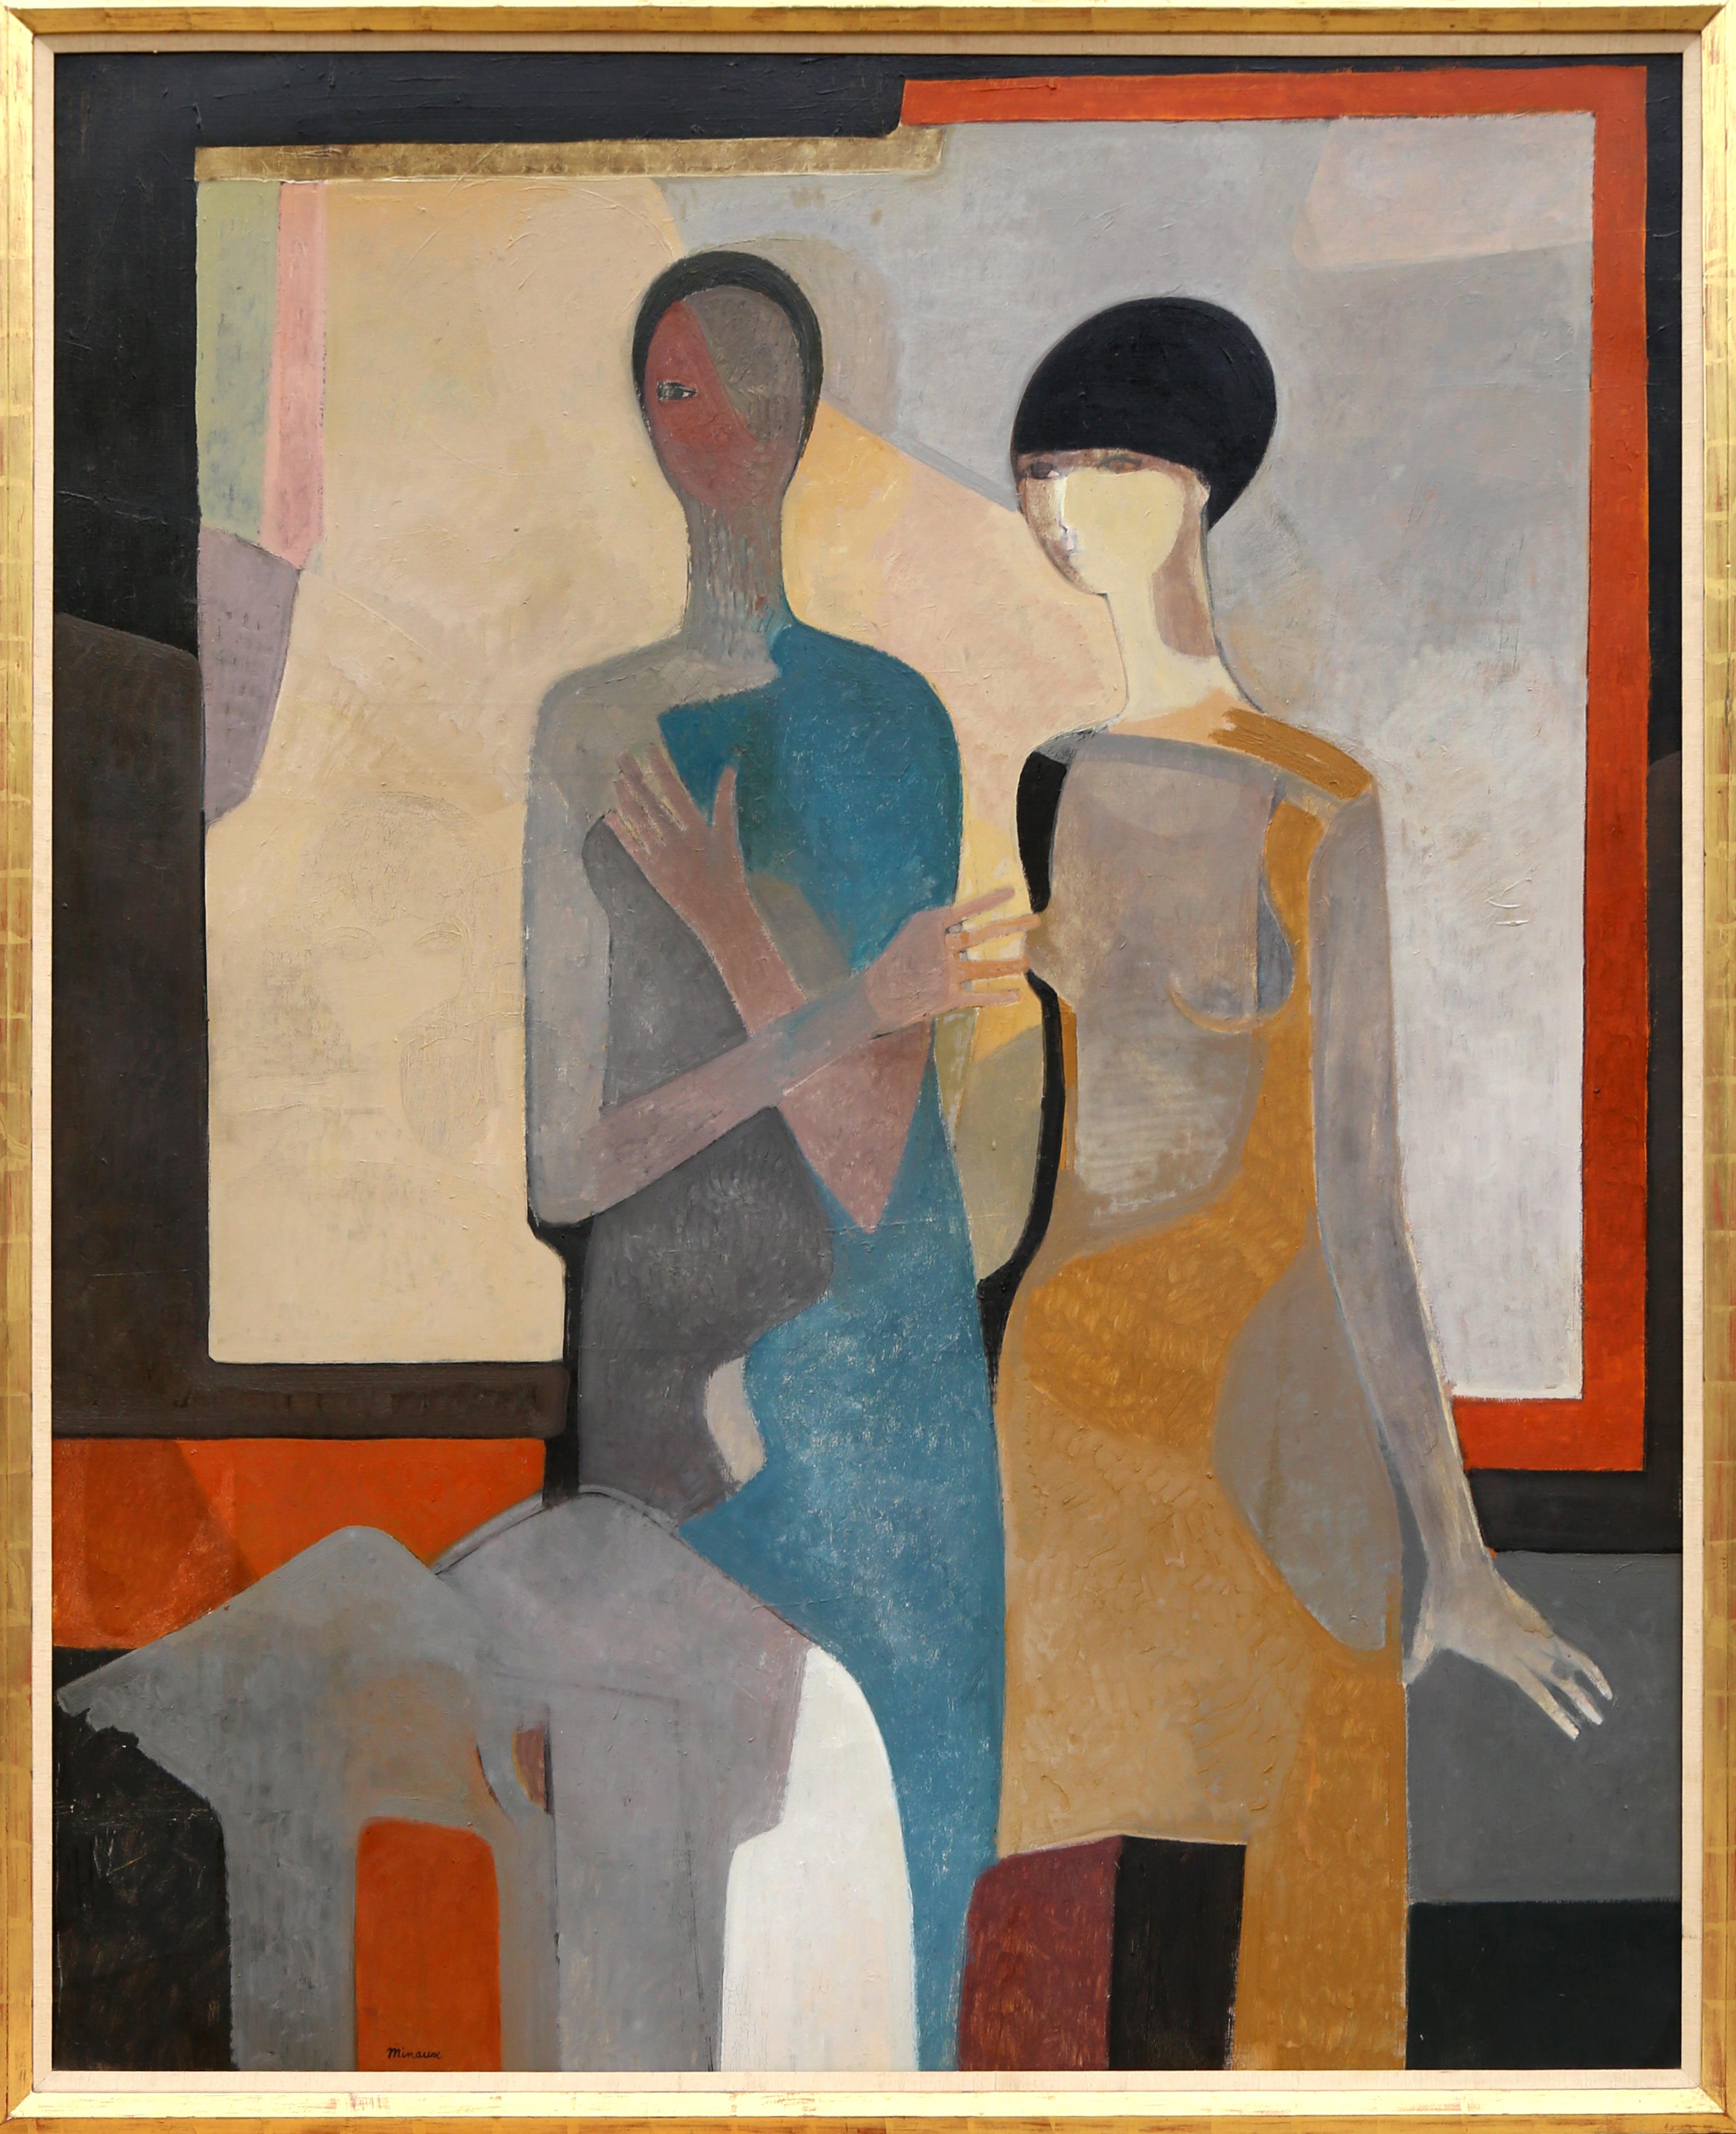 Two Women in Interior, Modern Cubist Painting by Andre Minaux